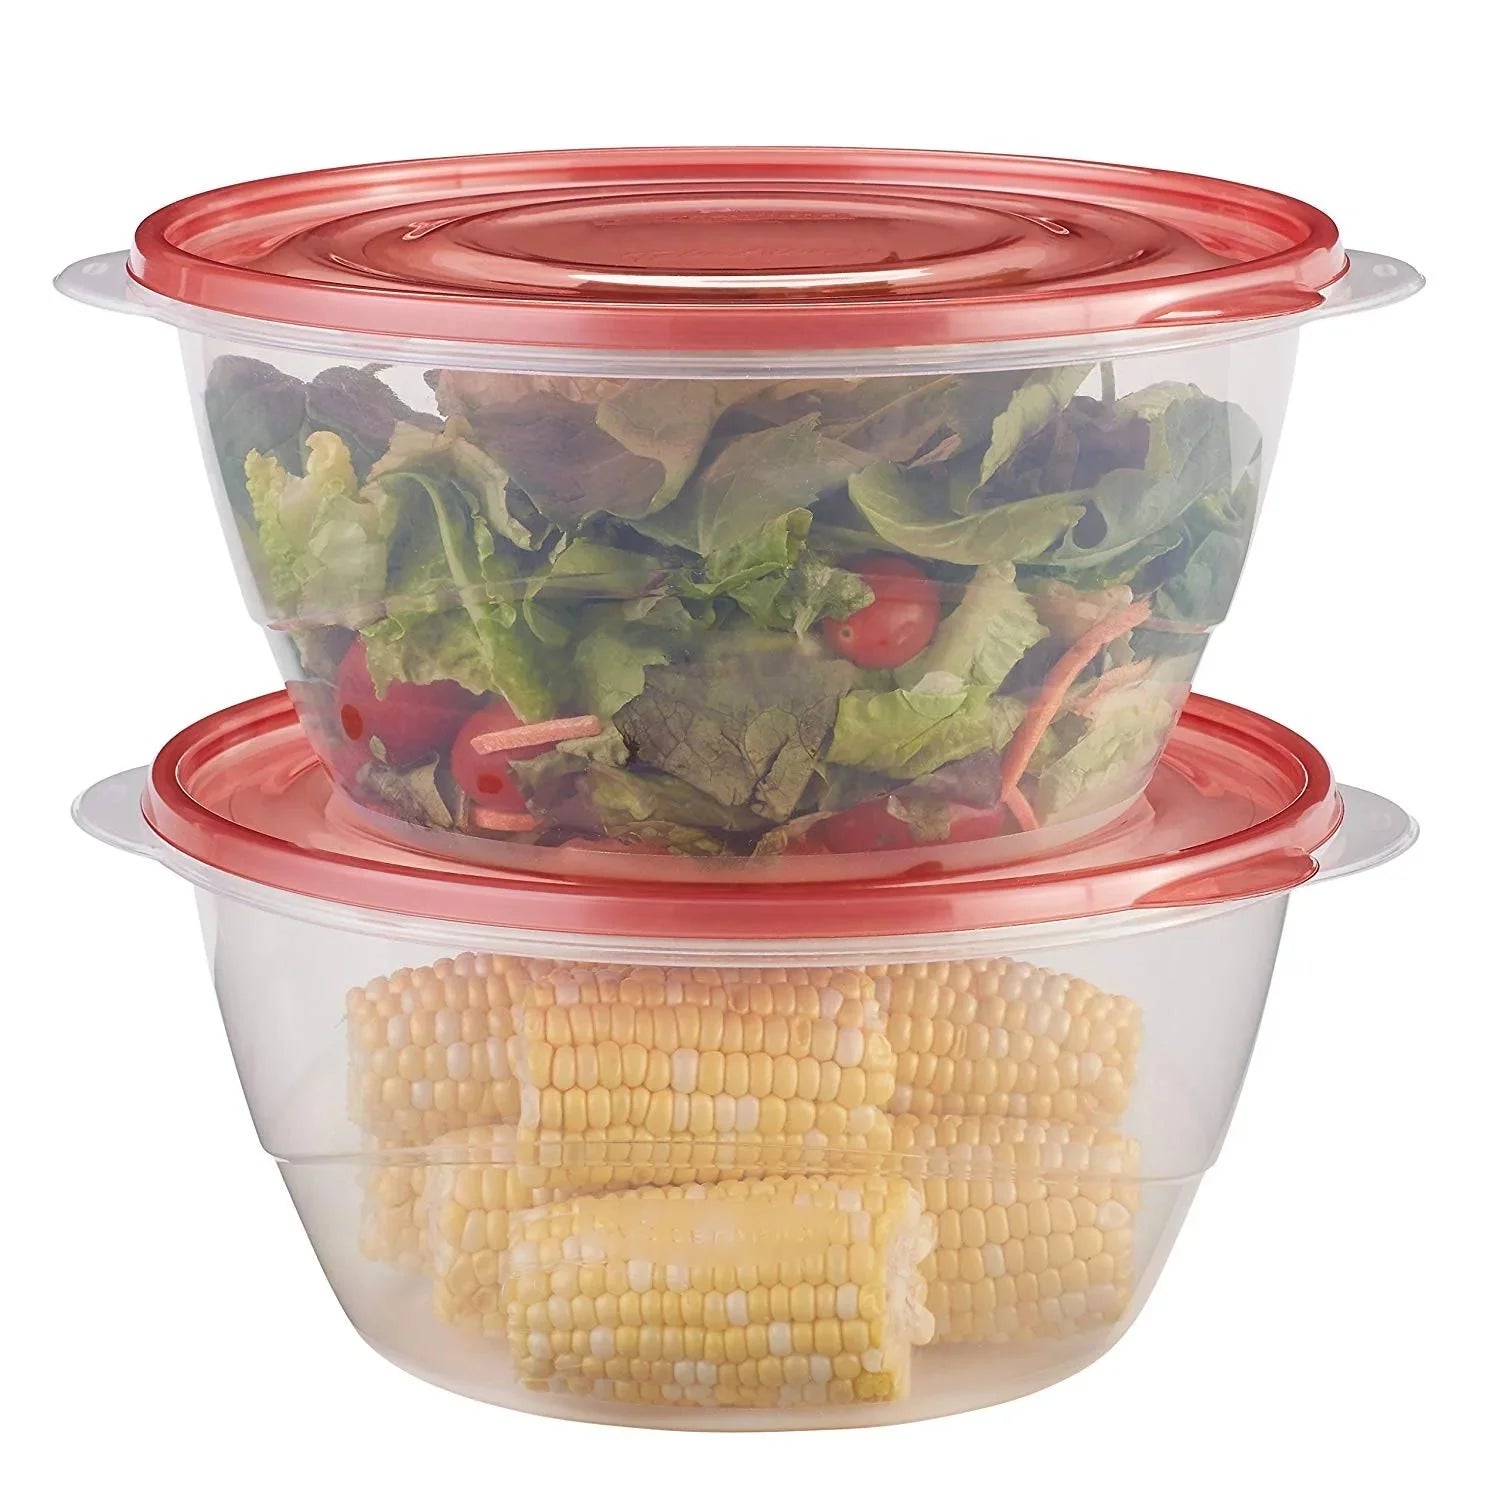 Wholesale prices with free shipping all over United States Rubbermaid TakeAlongs 15.7 Cup Round Food Storage Containers, Set of 2, Red - Steven Deals